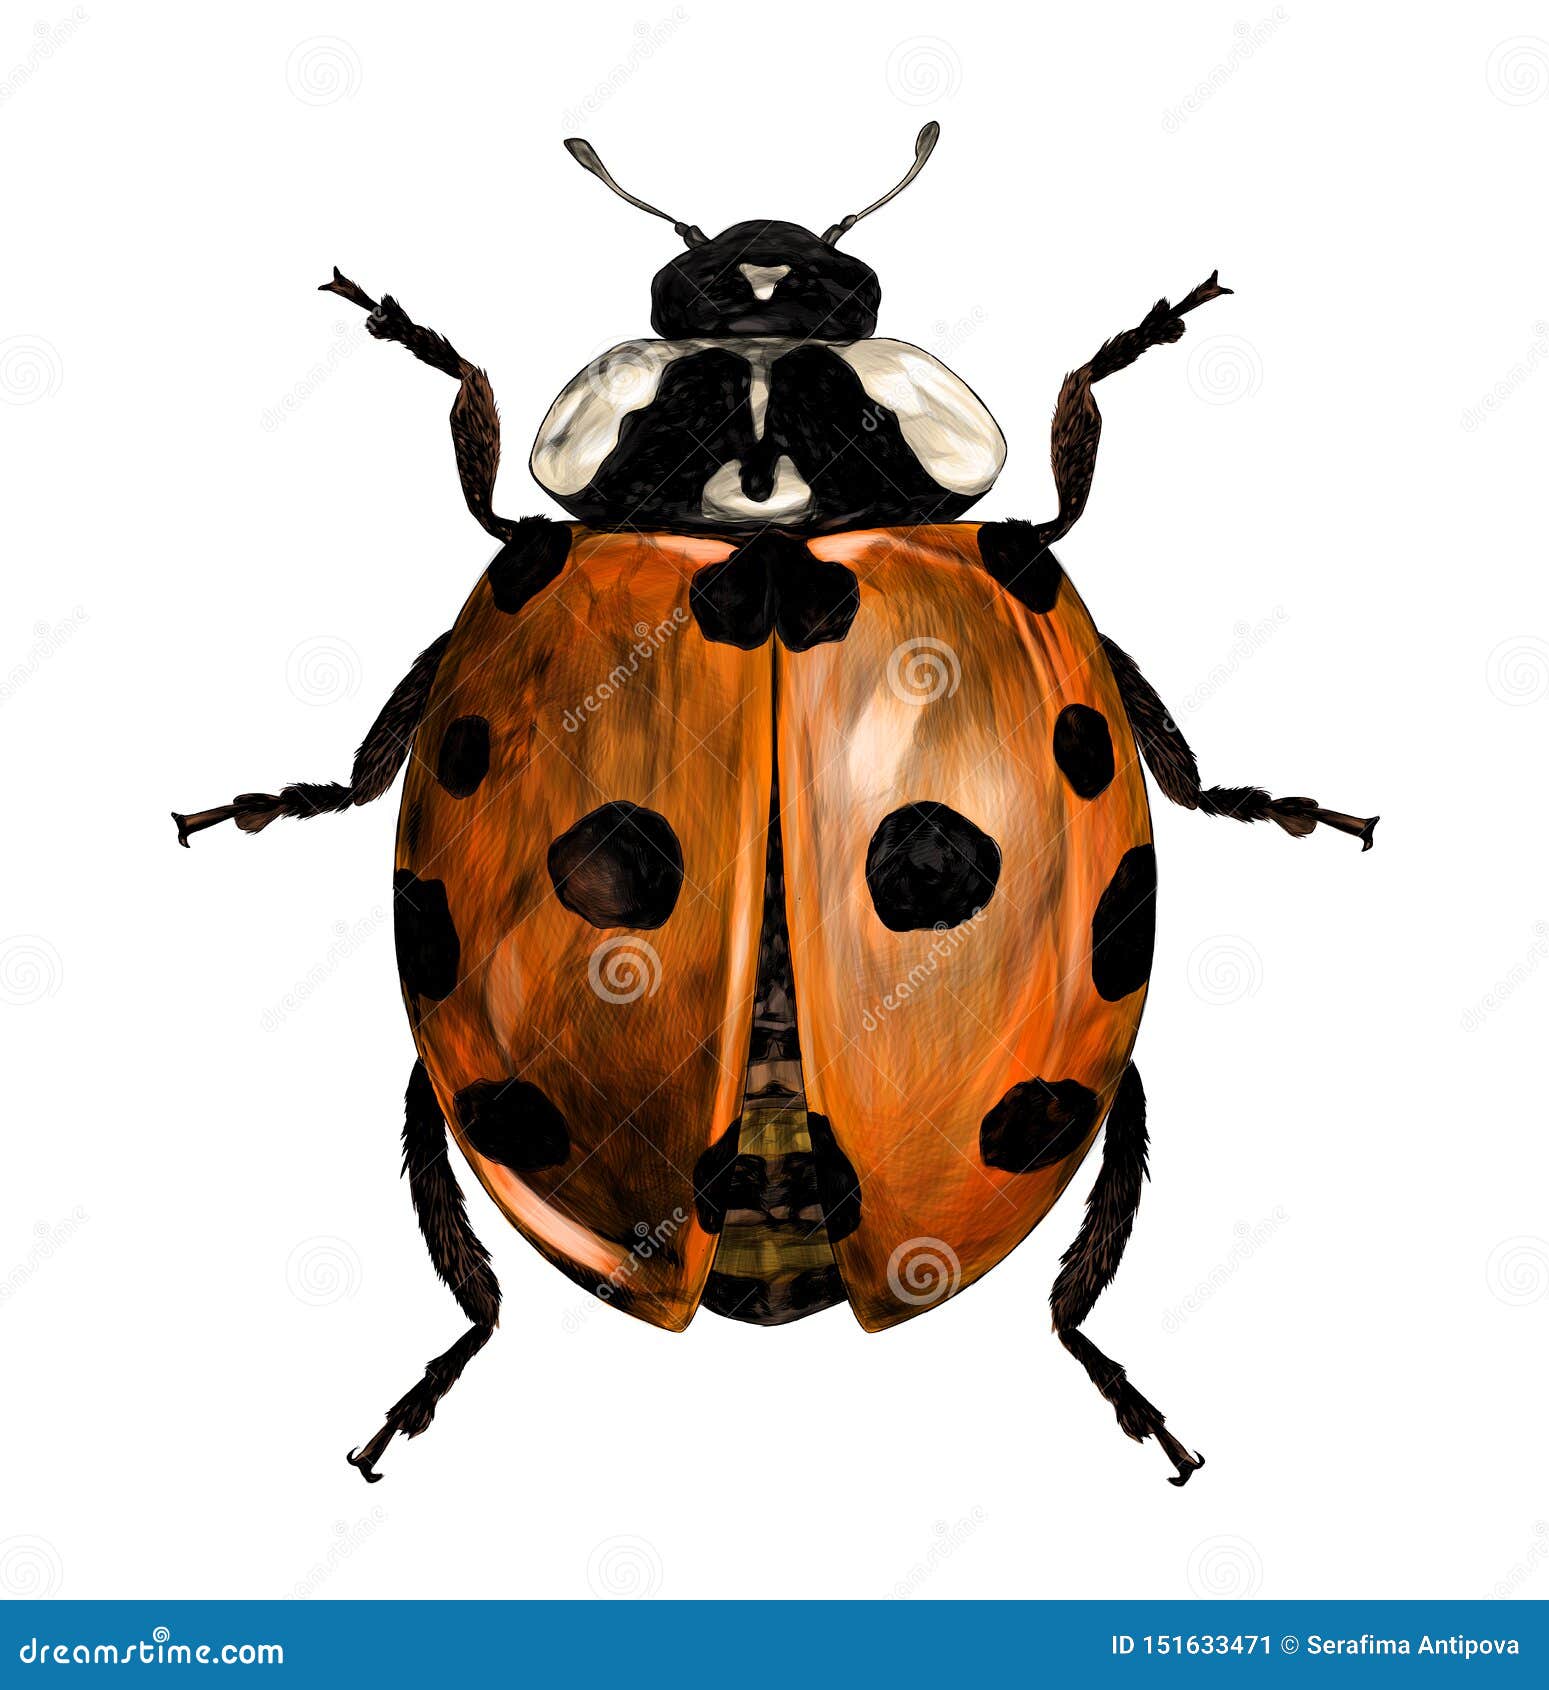 pencil drawing of ladybird - Clip Art Library